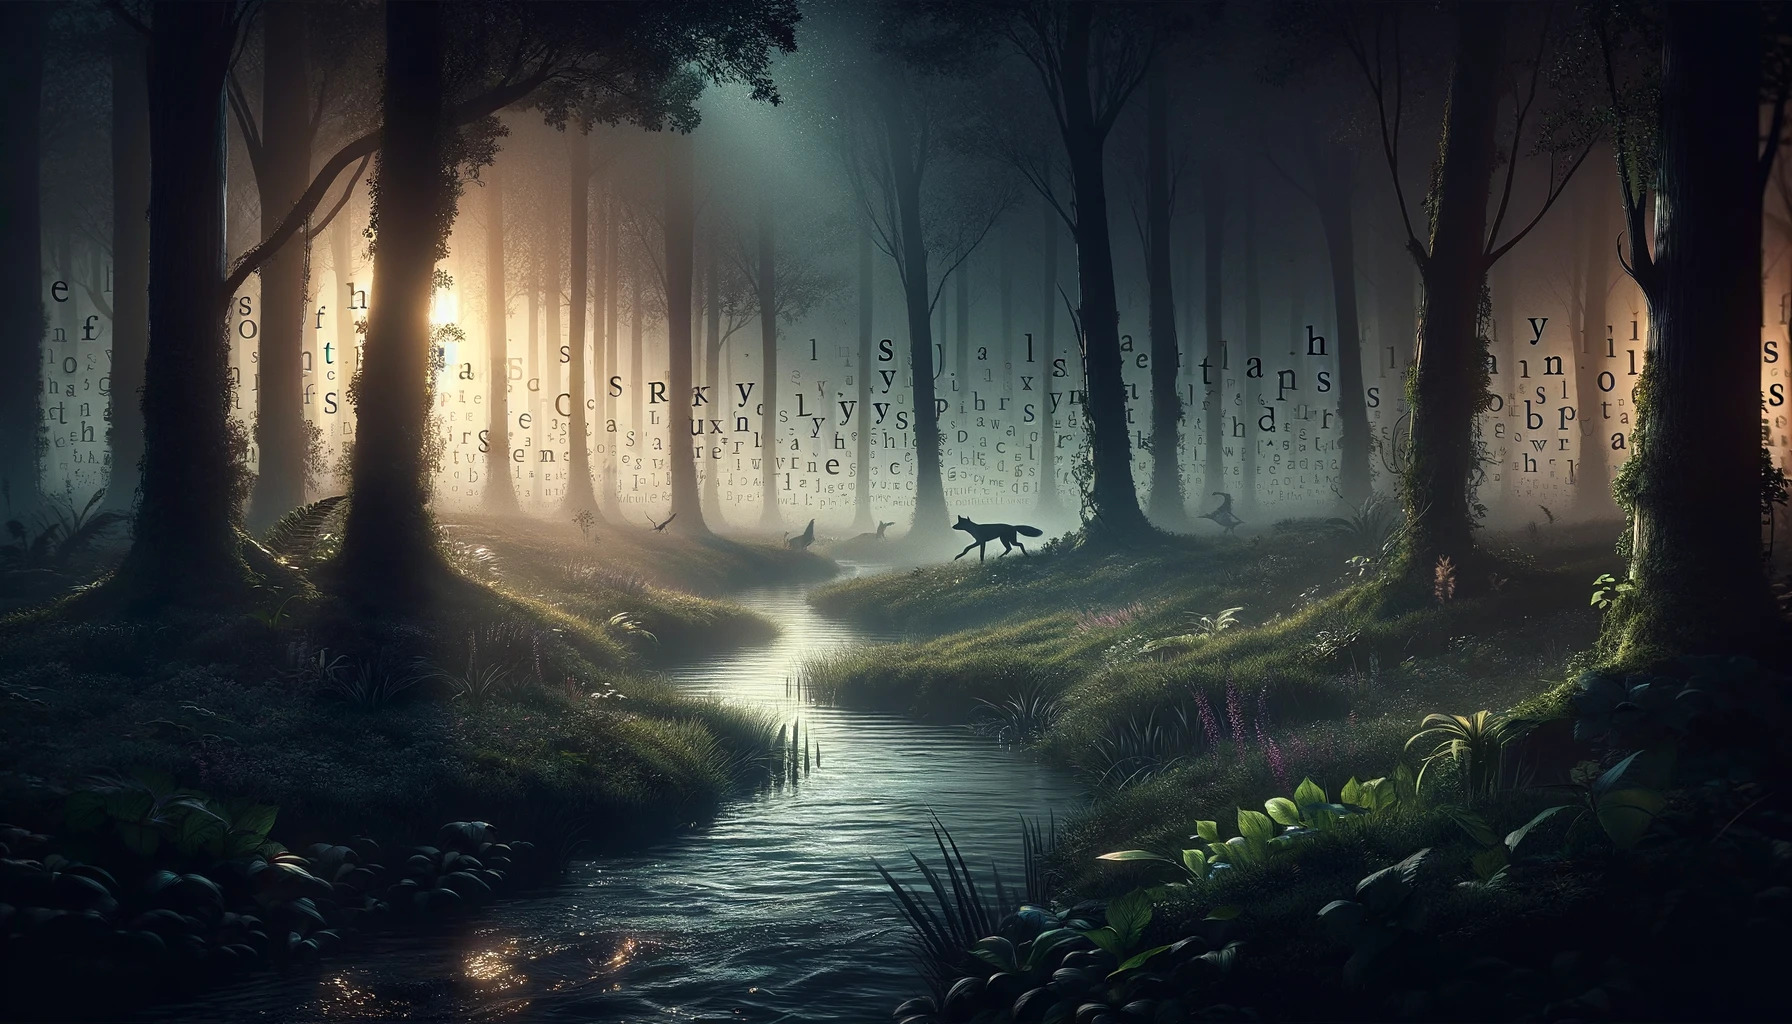 The image inspired by "5 Letter Words That Start With S" has been created, capturing a mystical forest scene at twilight.